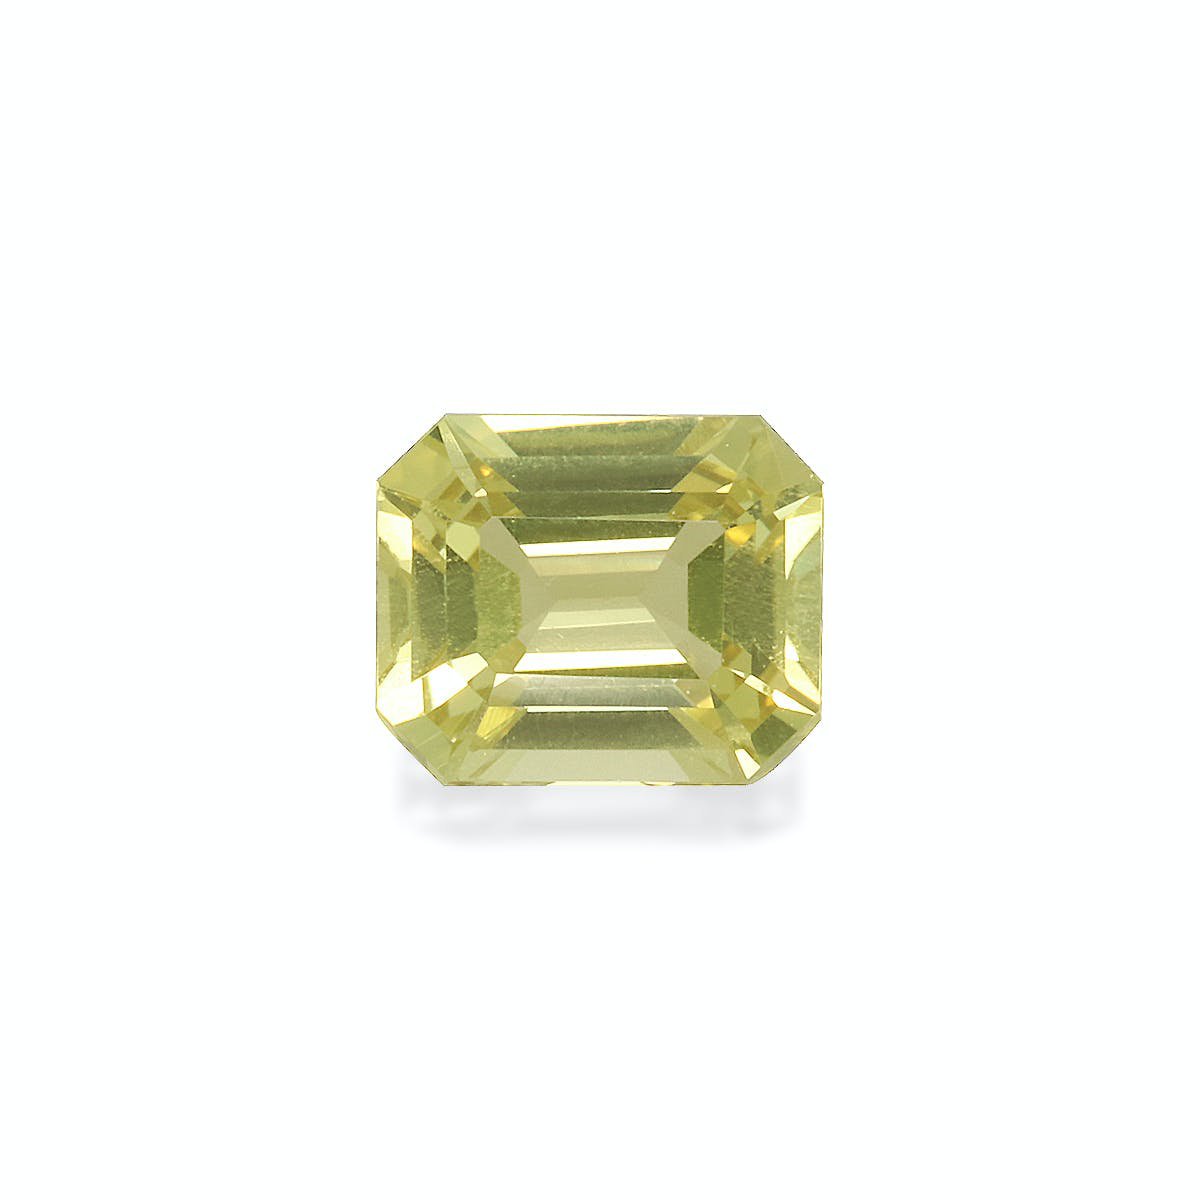 Picture of Golden Yellow Chrysoberyl 0.91ct (CB0162)